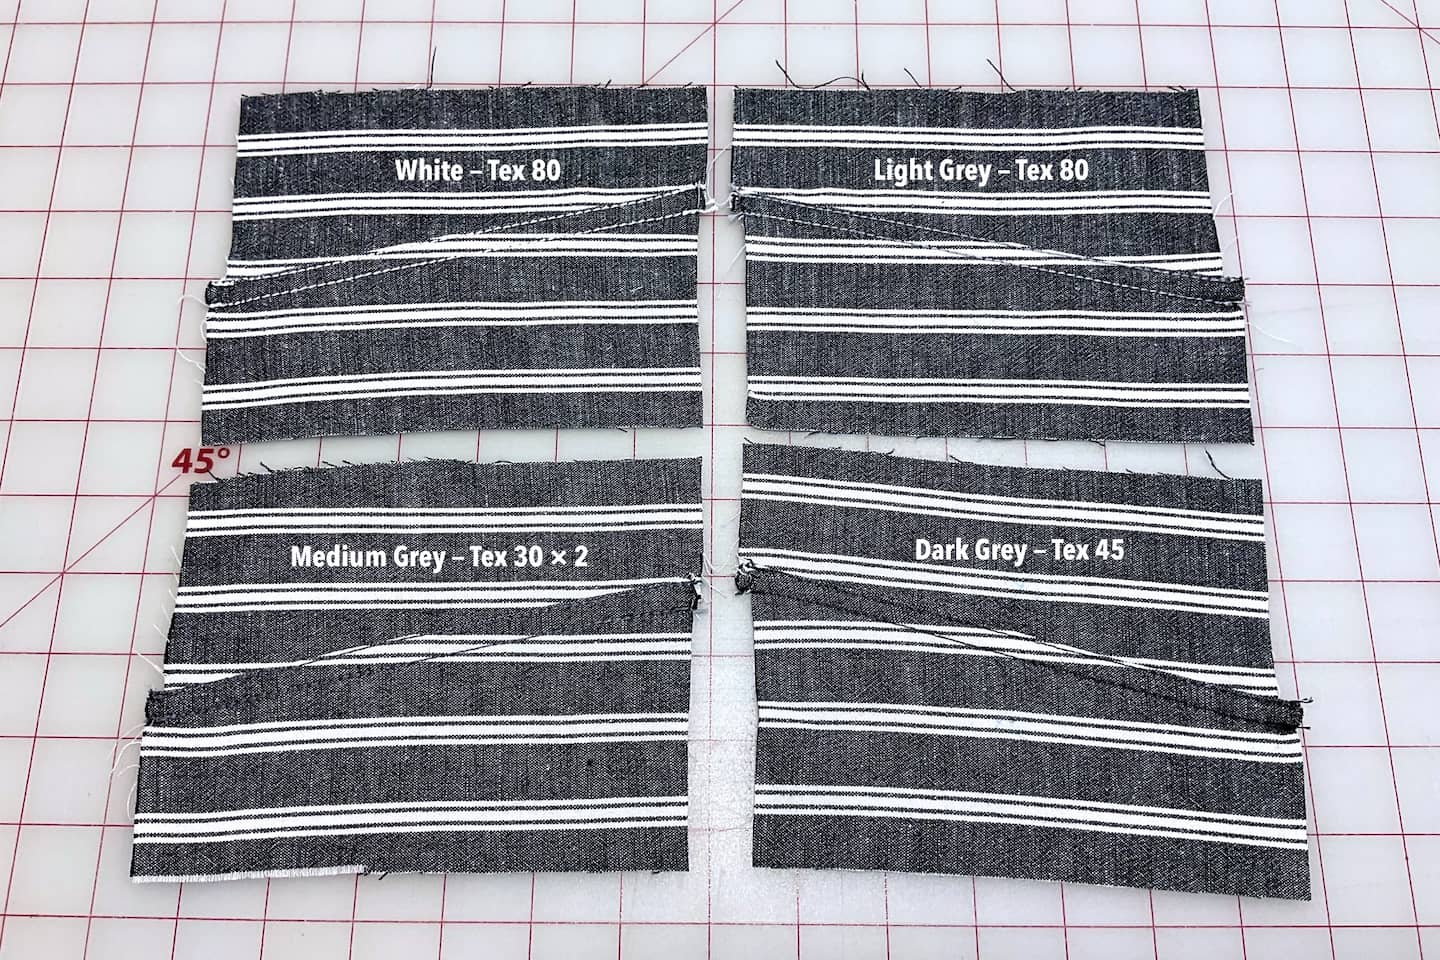 Four flat felled seams sewn out of grey linen/rayon fabric with white stripes. Each sample piece is sewn with a different colour and thickness of thread: white Tex 80, light grey Tex 80, medium grey Tex 30 doubled up, and dark grey Tex 45.